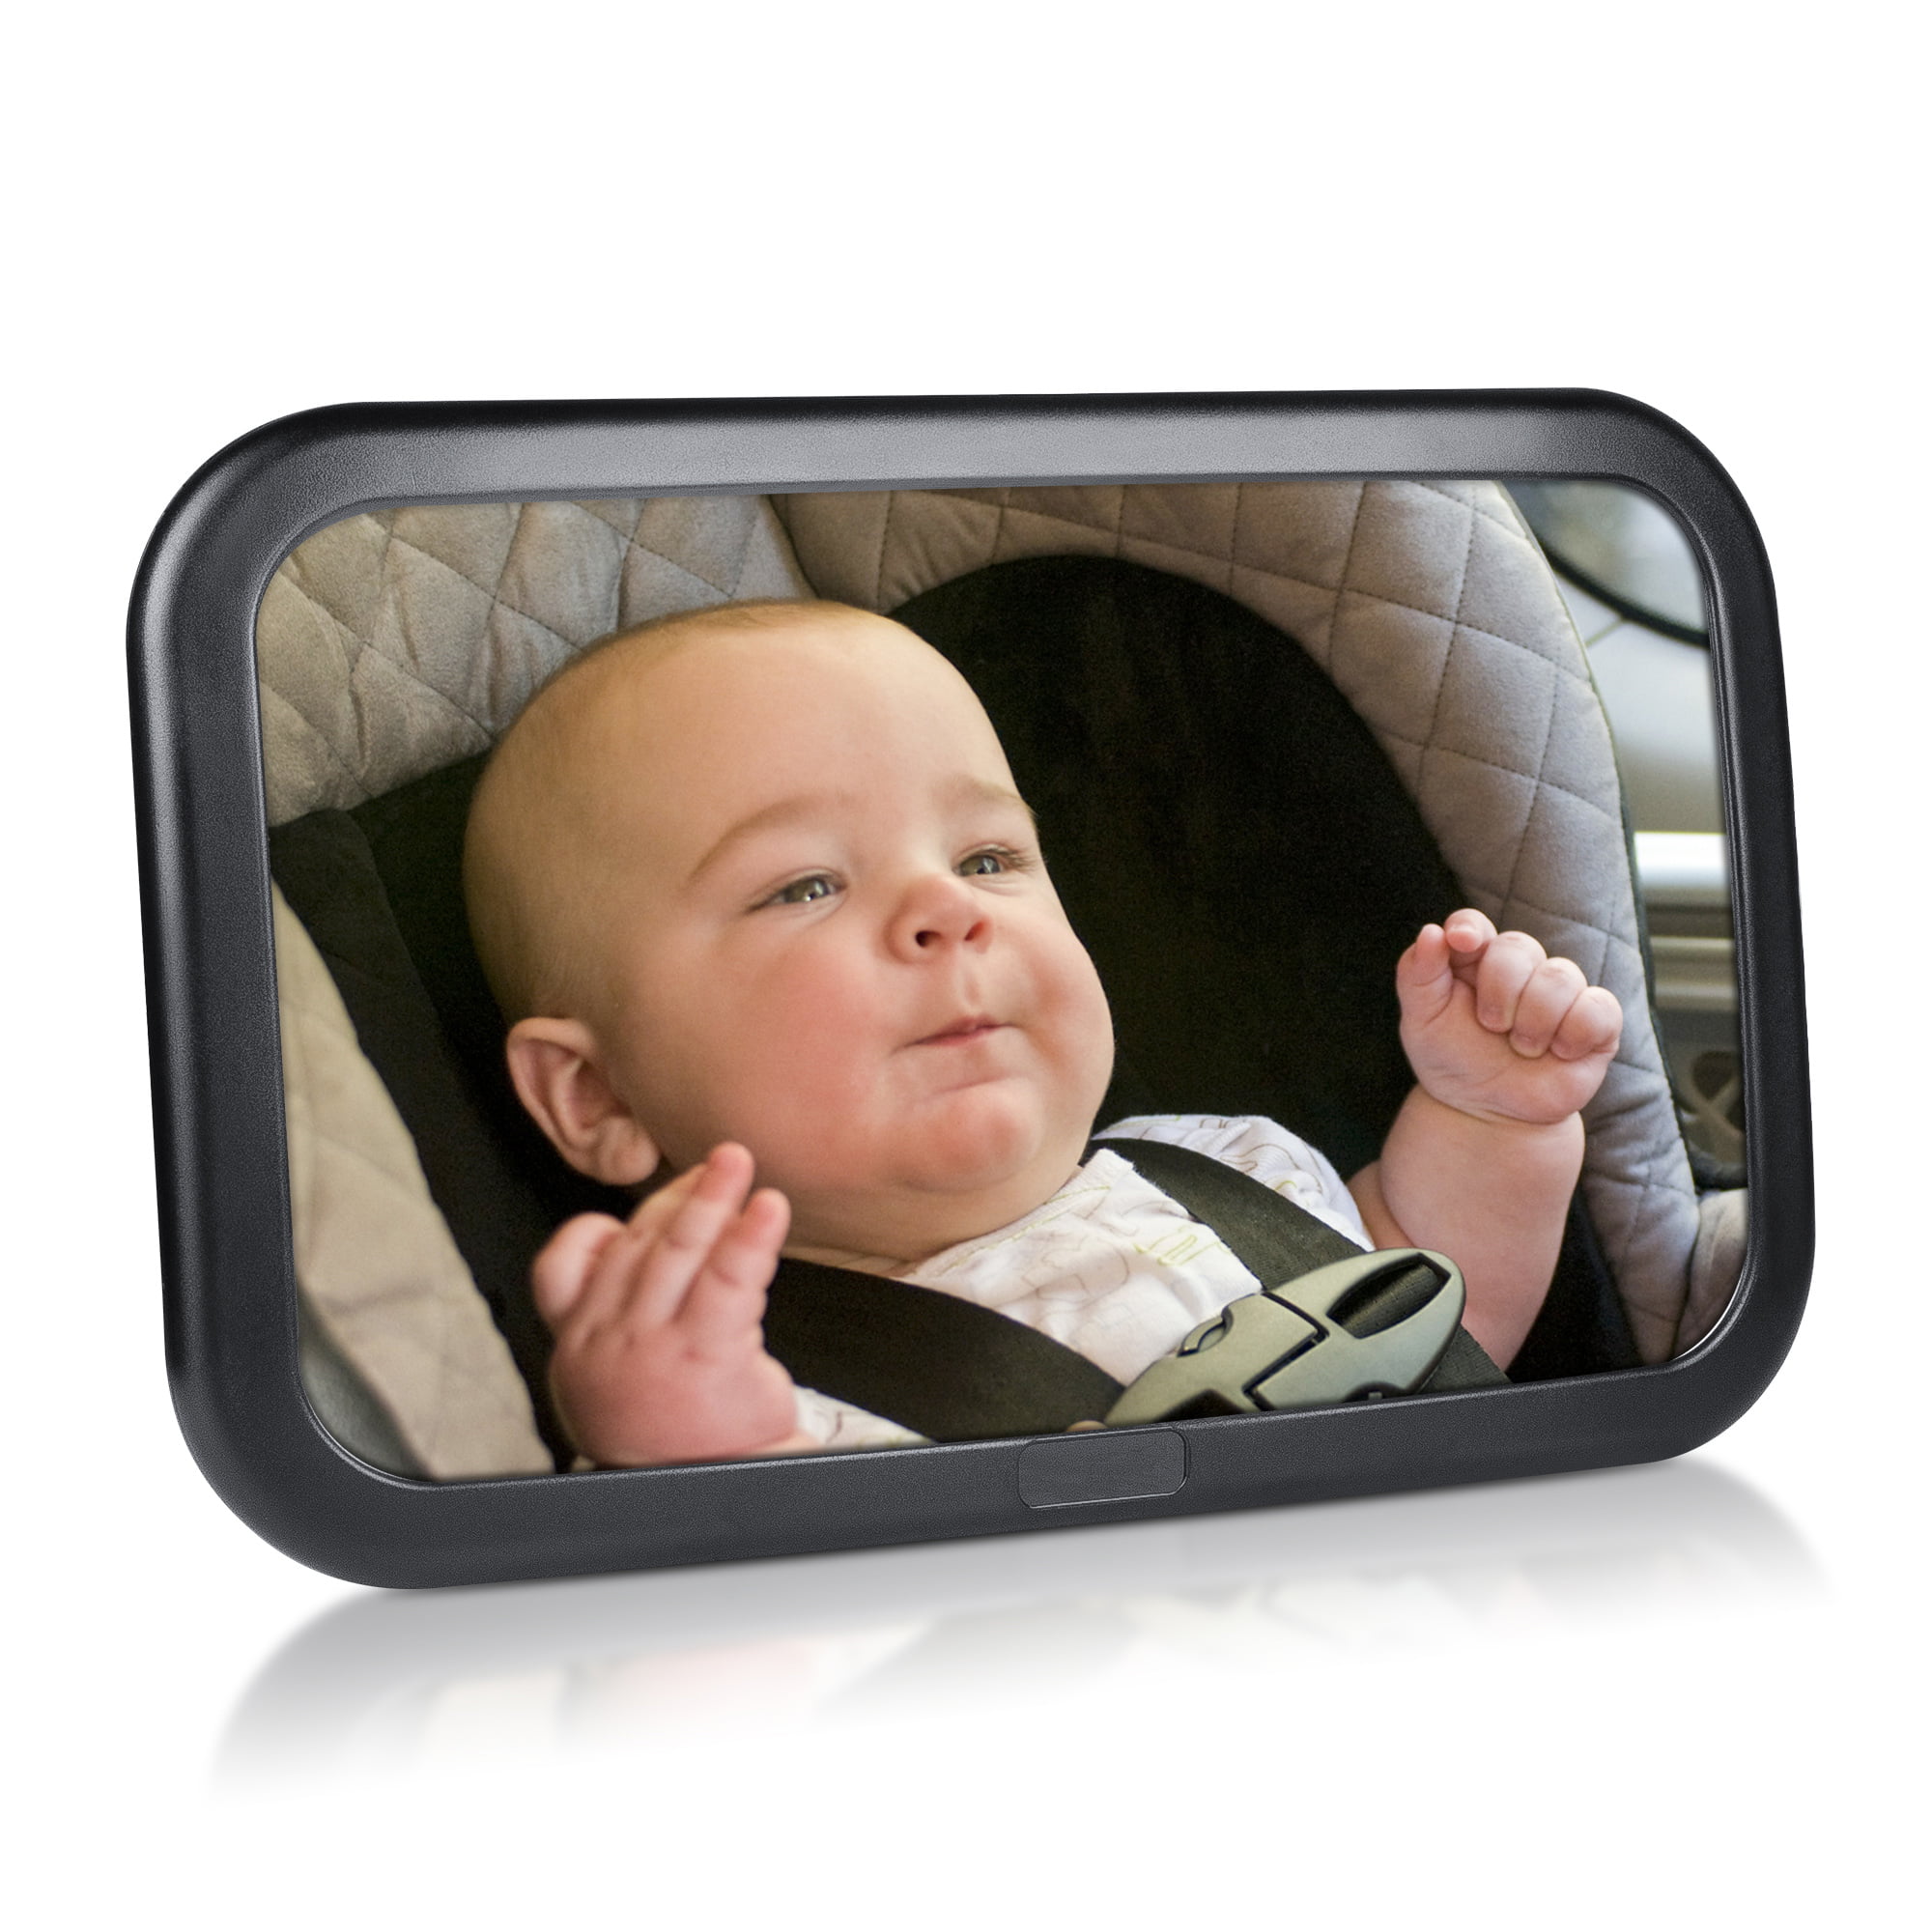 Baby Mirror for Car Largest and Most Stable Backseat Mirror with 